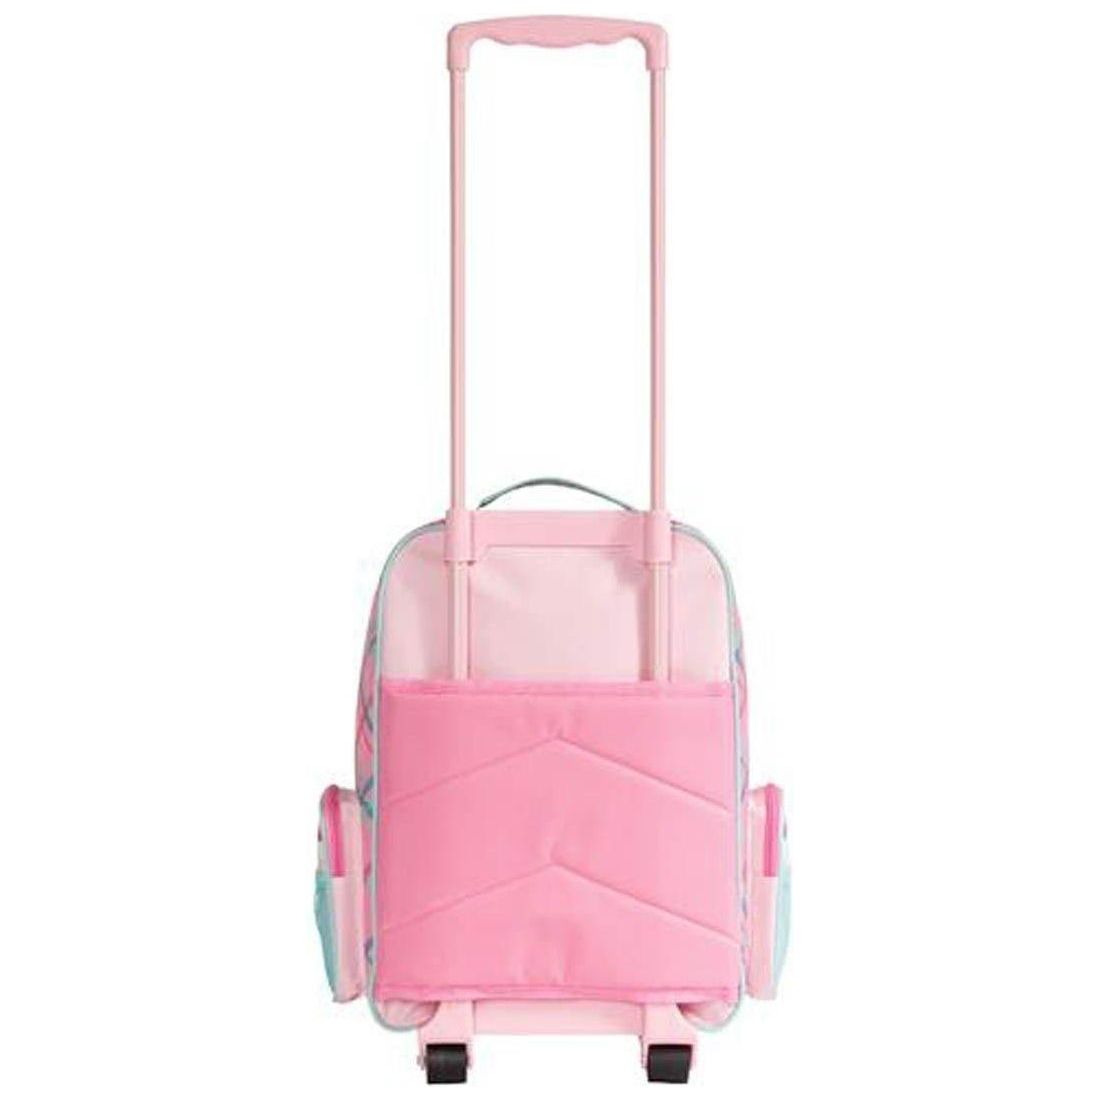 Stephen Joseph Classic Rolling Luggage 18 inch Pink Unicorn - BumbleToys - 5-7 Years, Backpack, Cecil, Girls, Pre-Order, School Supplies, Stephen Joseph 2023